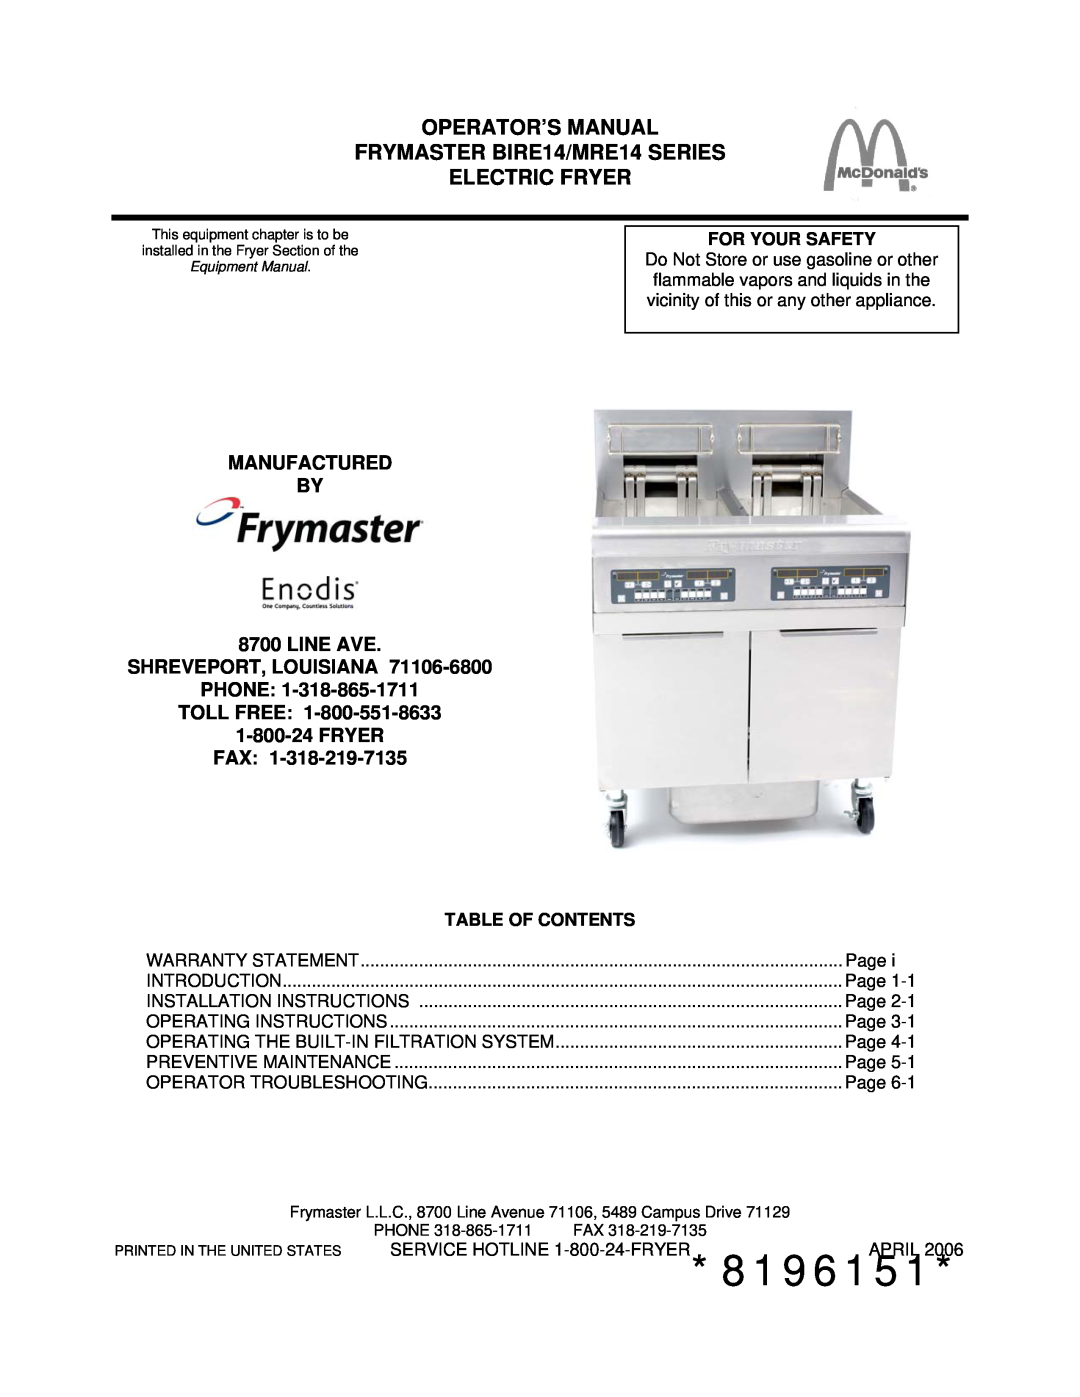 Frymaster MRE14 SERIES warranty 8196151, MANUFACTURED BY 8700 LINE AVE, Shreveport, Louisiana Phone: Toll Free 